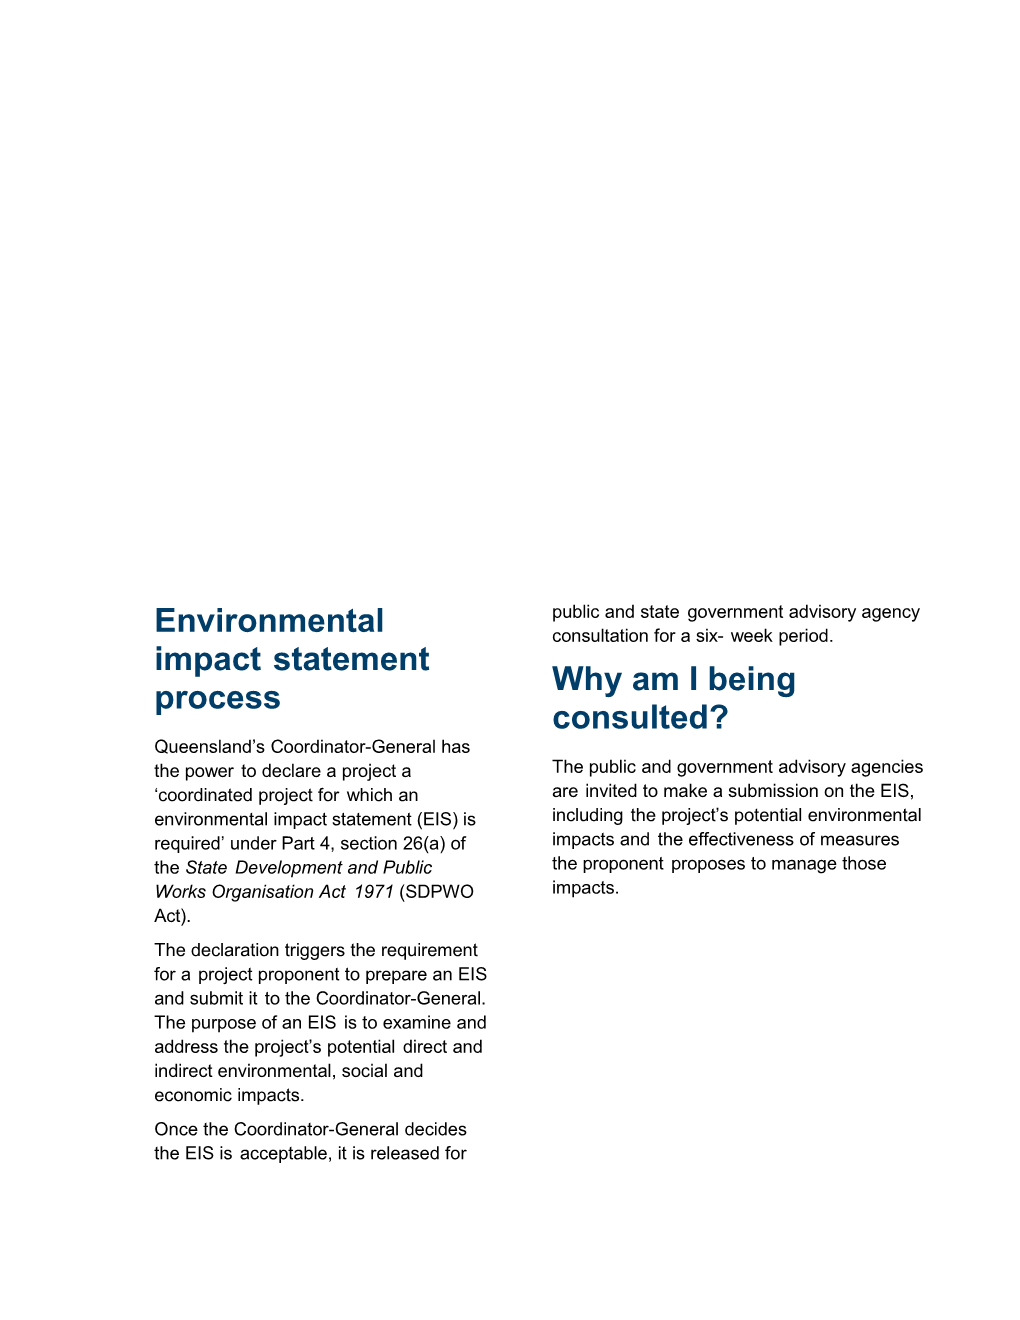 Have Your Say on an Environmental Impact Statement - Fact Sheet